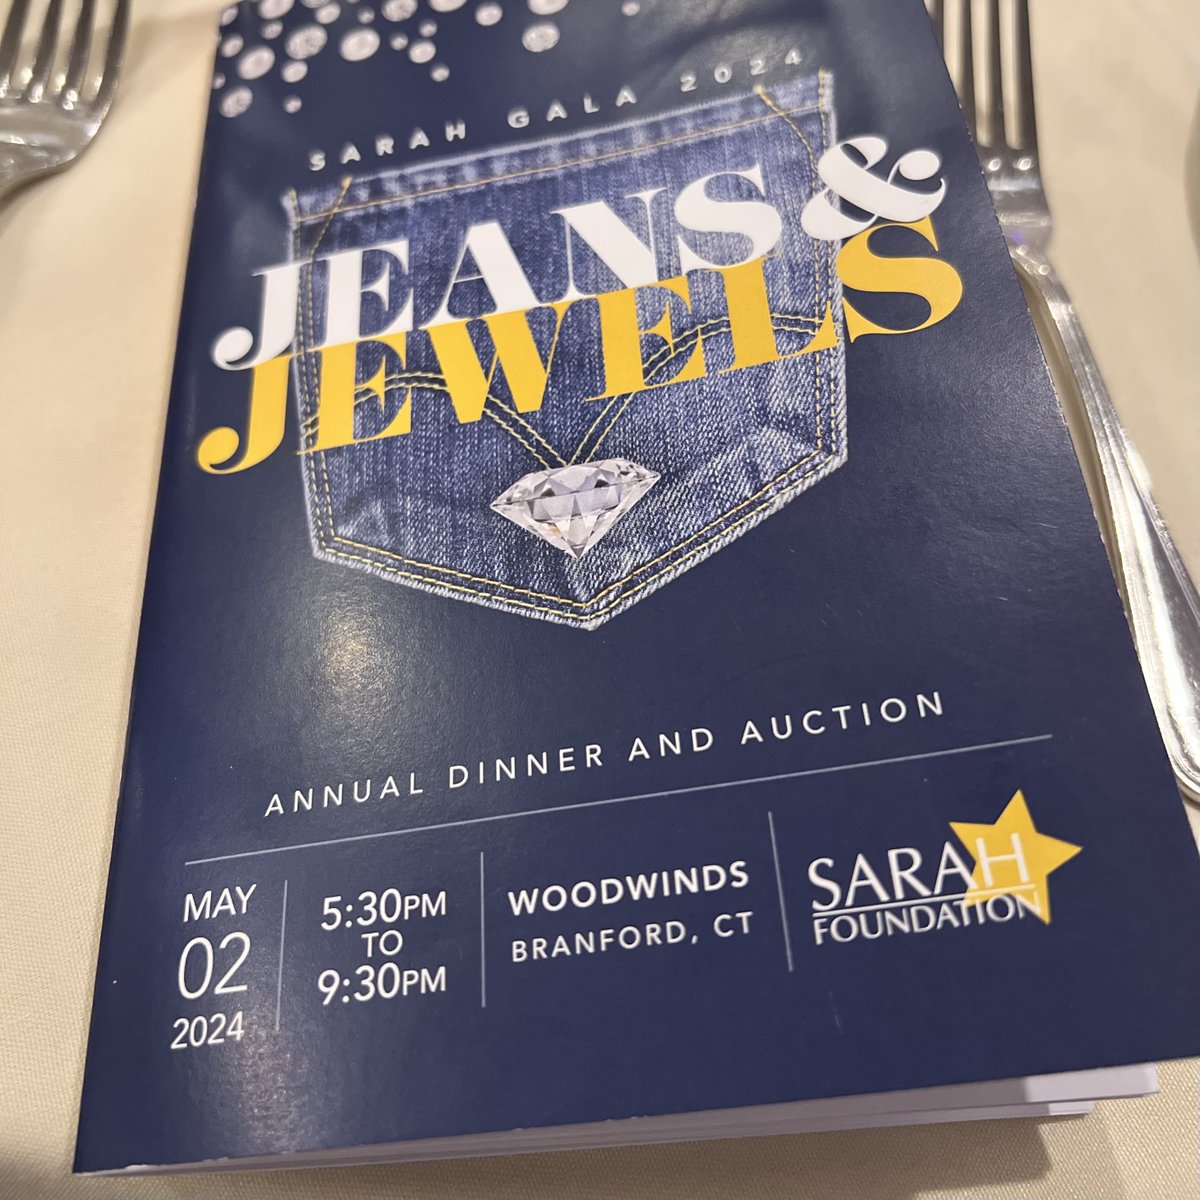 My wife, Mrs. Win Fast (Jennifer) and I are at The Woodwinds in Branford, CT for the Sarah Foundation Gala— Jeans and Jewels. Jen is on the board and we’re here to help support their mission to help people with disabilities. #connecticut #sarahfoundationct #branfordct